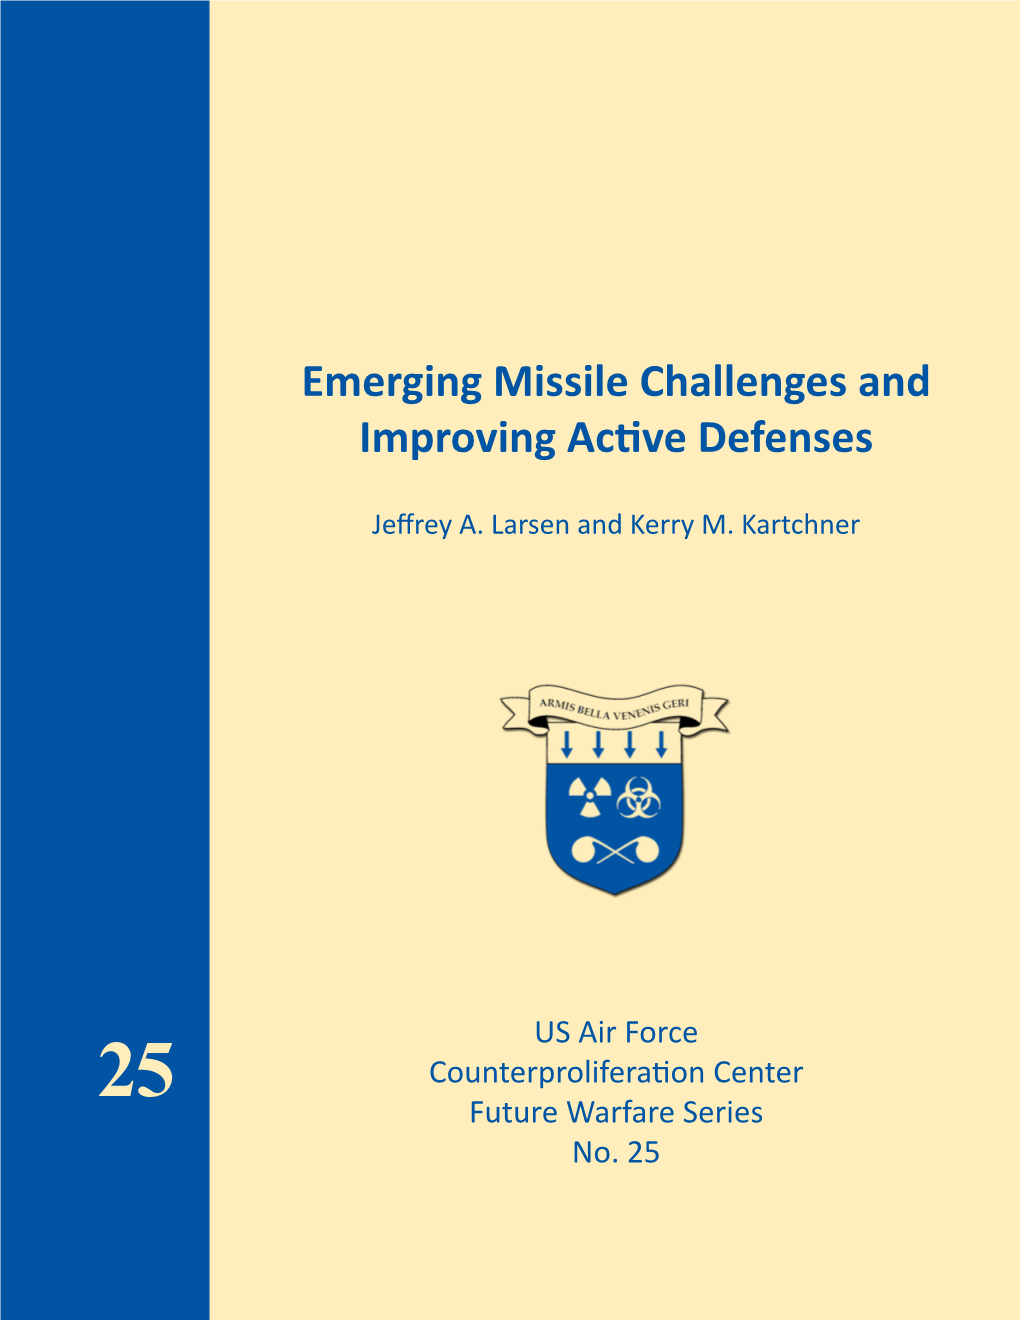 Emerging Missile Challenges and Improving Active Defenses